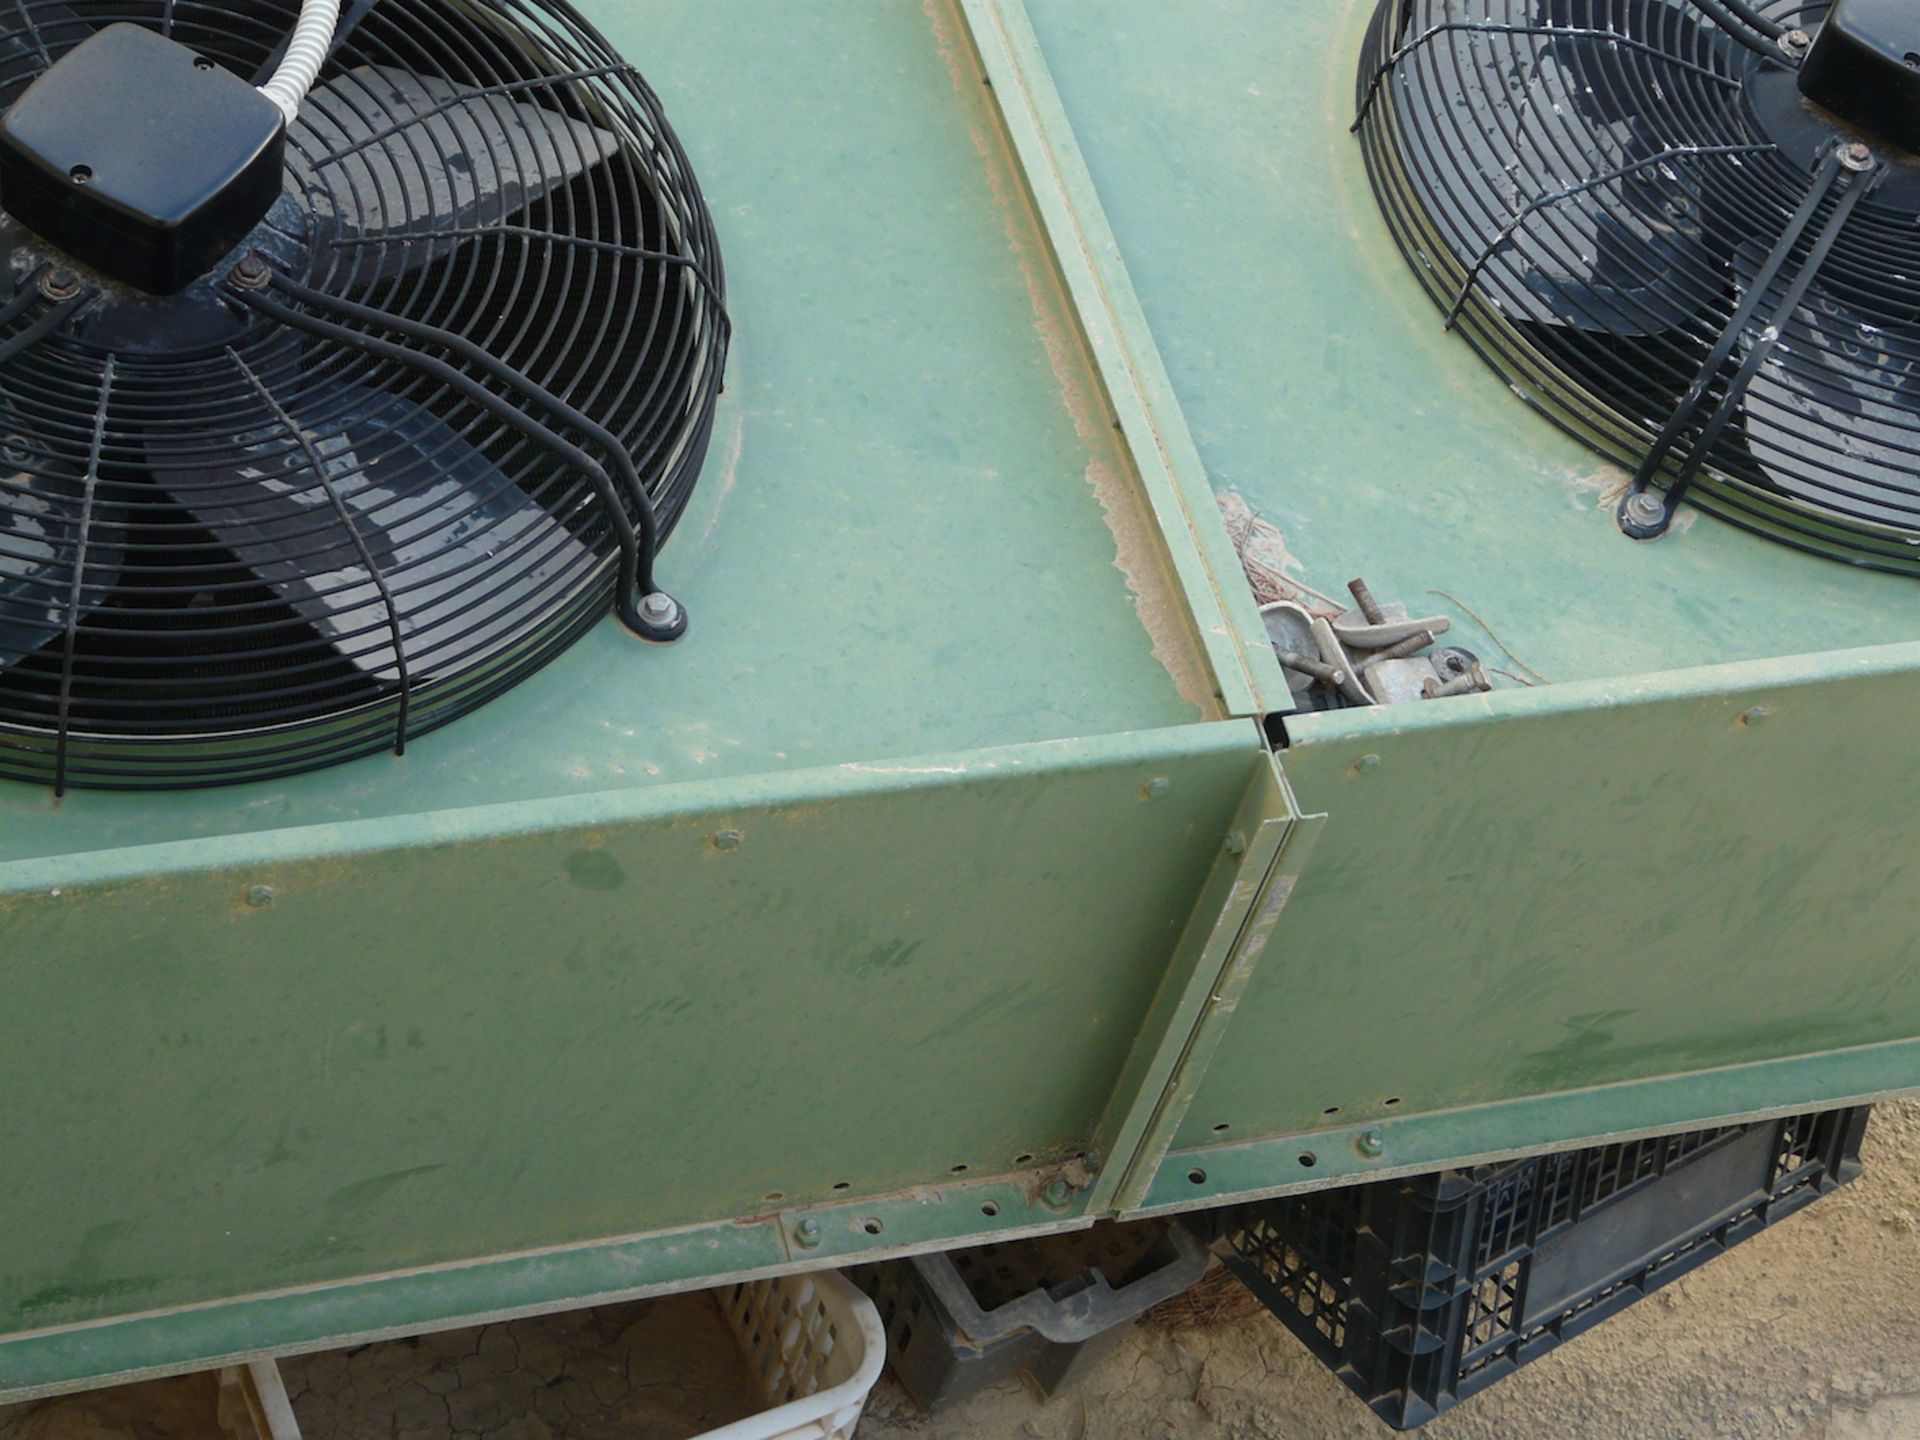 English: Condenser with 4 fans (one is out of order) 180m³ Used for Cold Rooms Greek: Κοντέσερ - Image 7 of 9